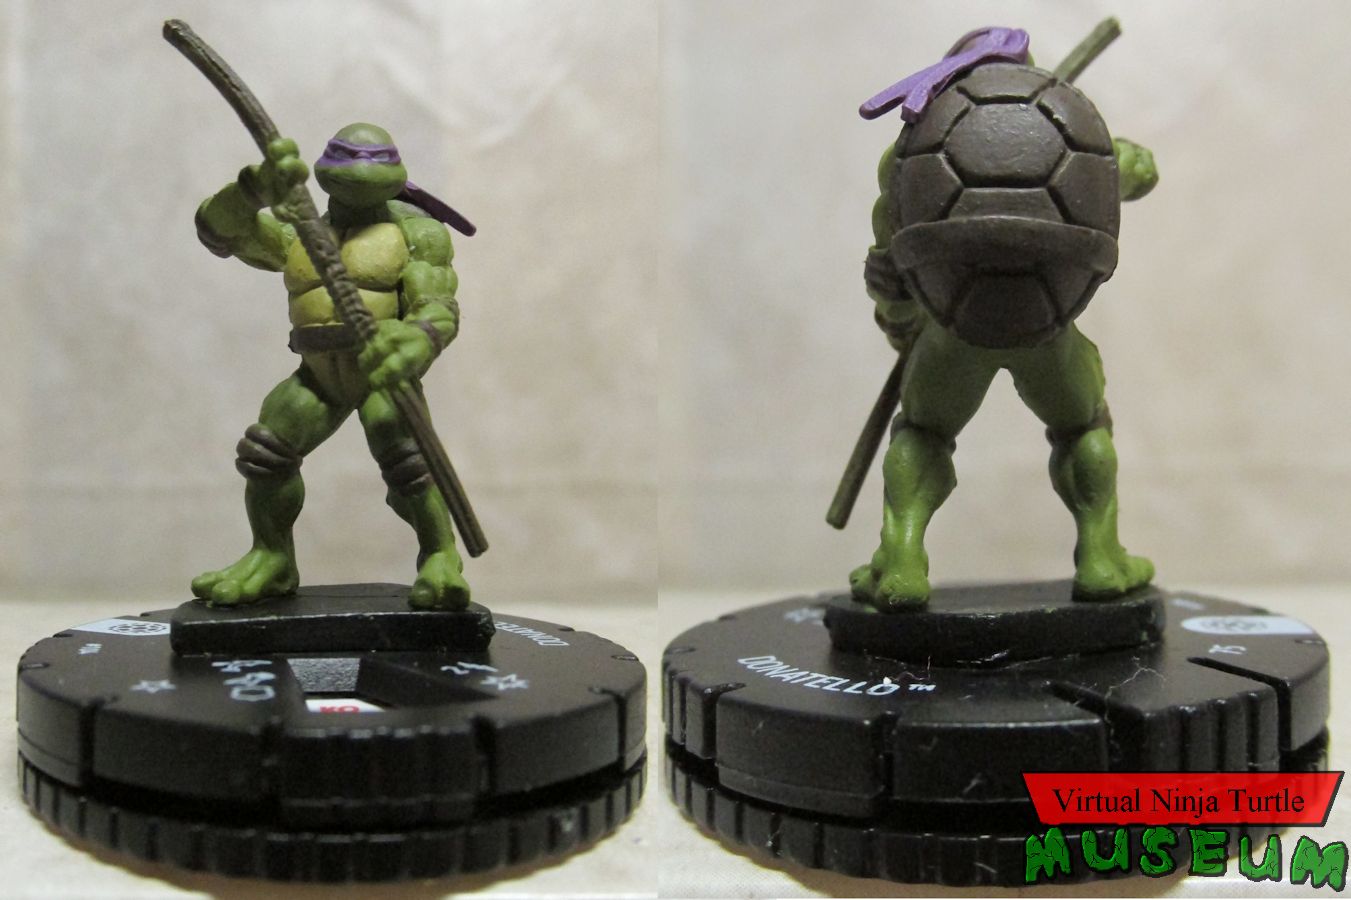 Donatello 104 front and back